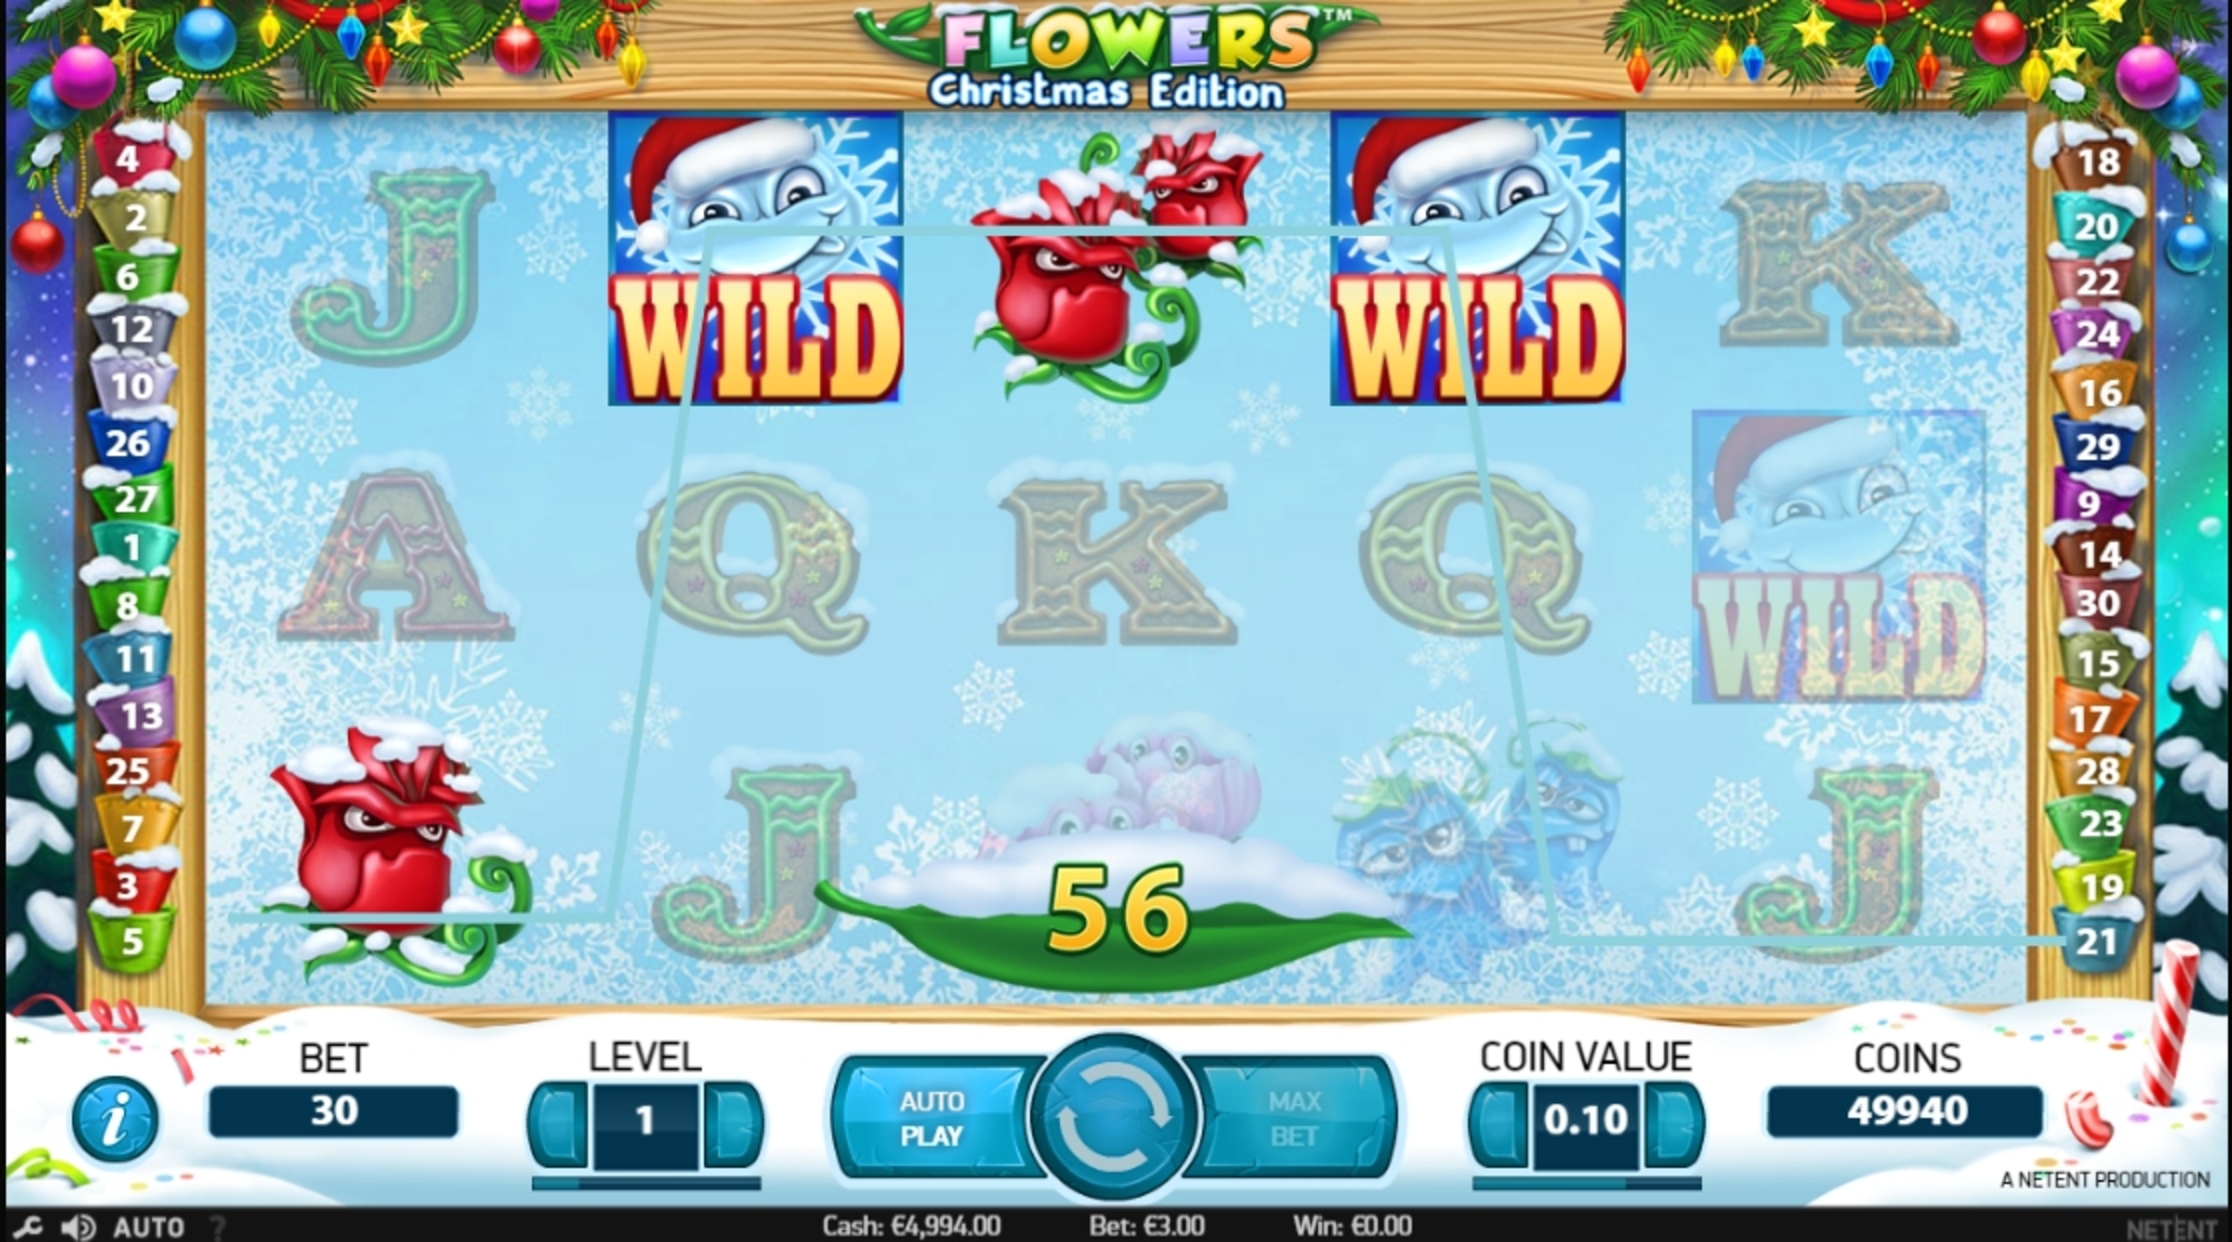 Win Money in Flowers Christmas Edition Free Slot Game by NetEnt